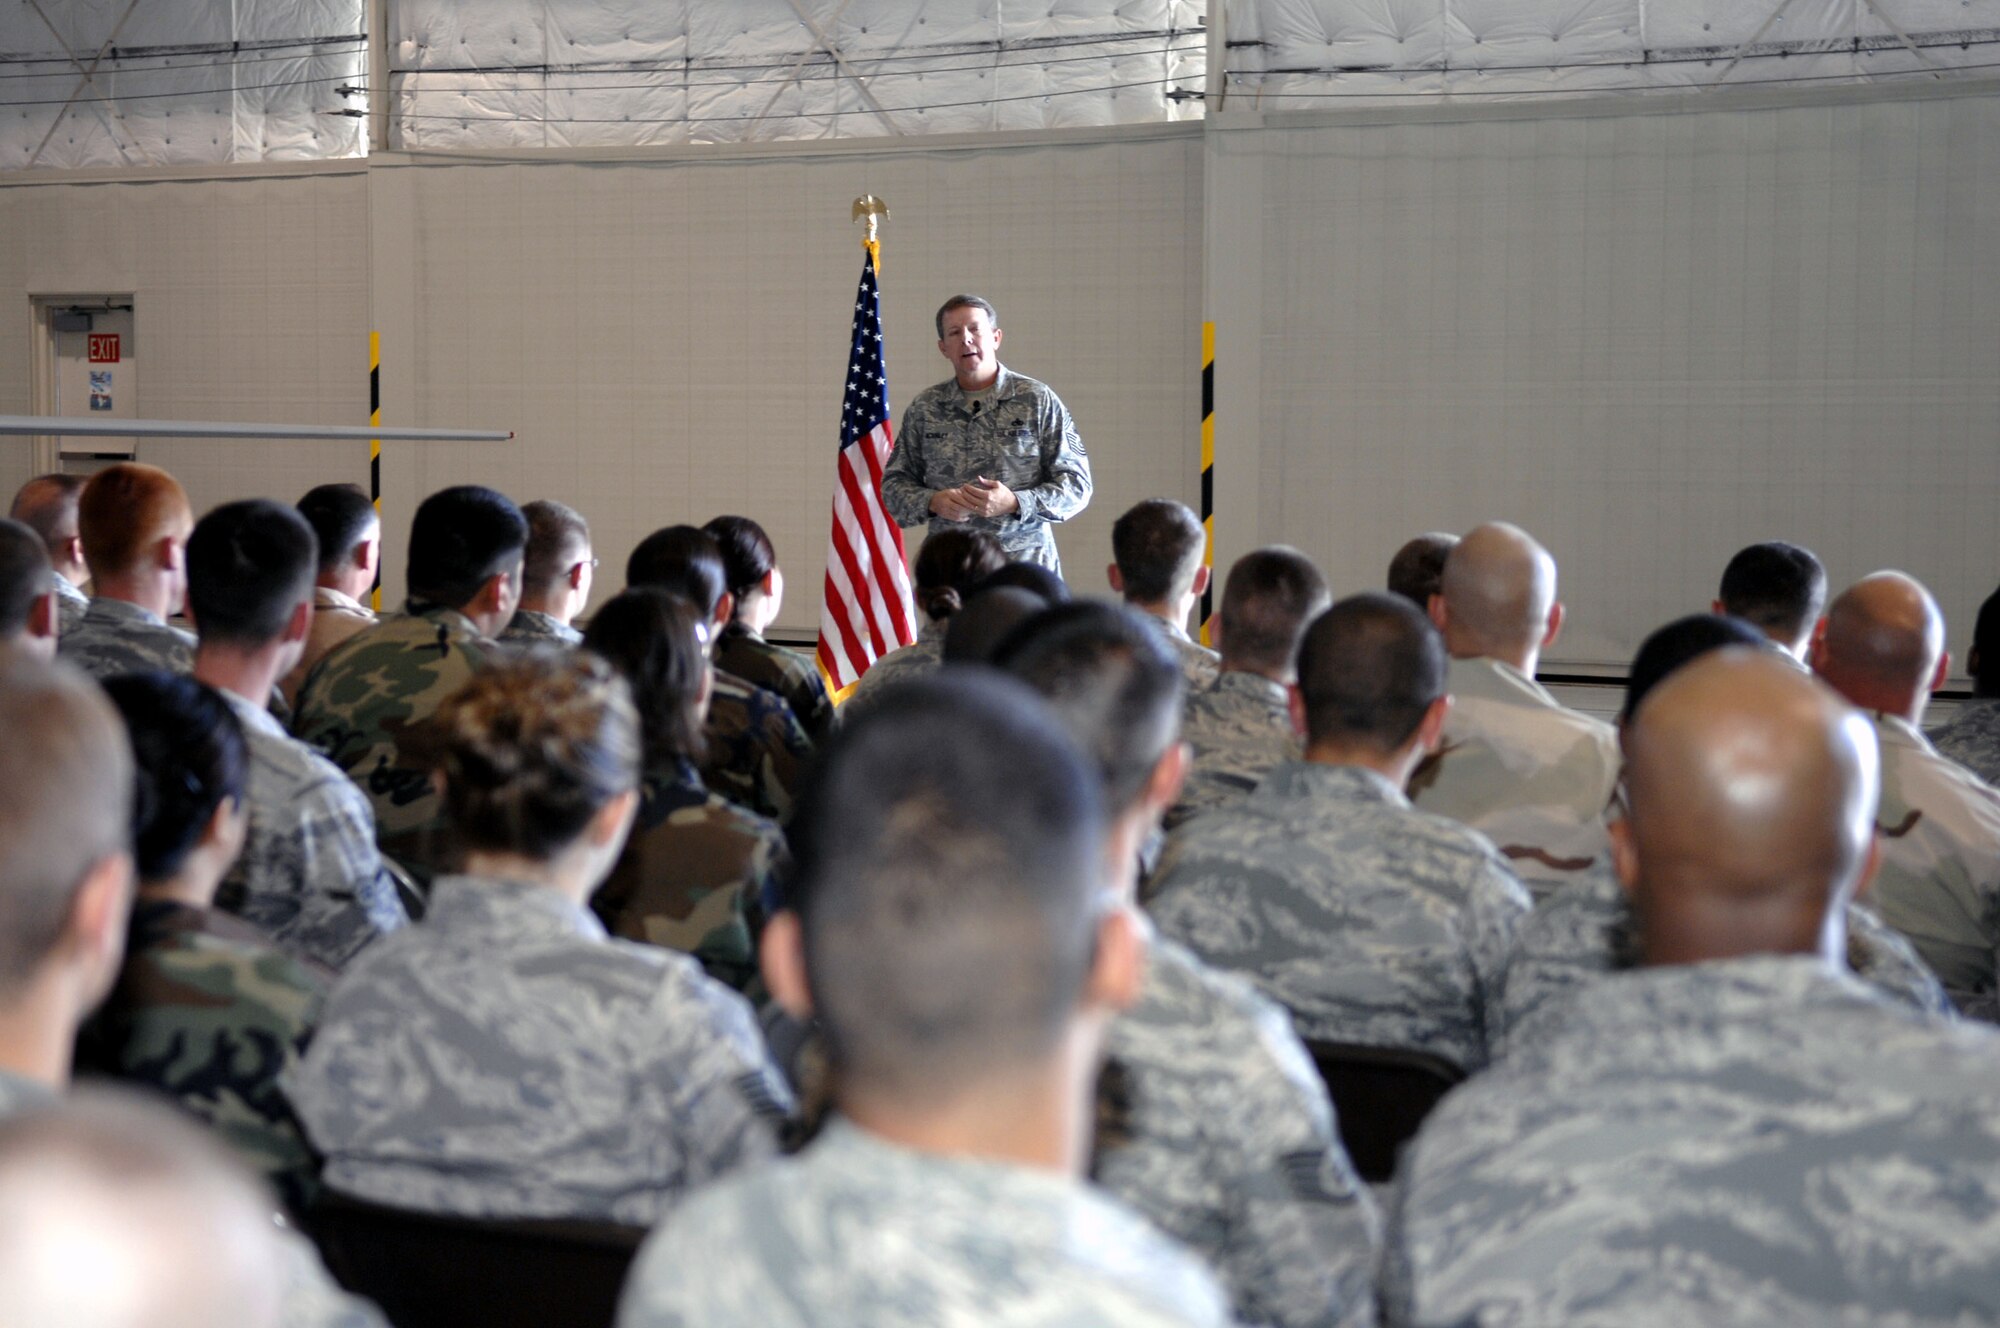 CREECH AFB, Nev. --  Chief Master Sergeant of the Air Force Rodney J. McKinley addresses Airmen here during an “All Call” Oct. 7. Chief McKinley visited Creech and the 432d Wing to get a first-hand look at operations and quality of life of the Airmen here. (U.S. Air Force photo/Airman 1st Class Stephanie Rubi)